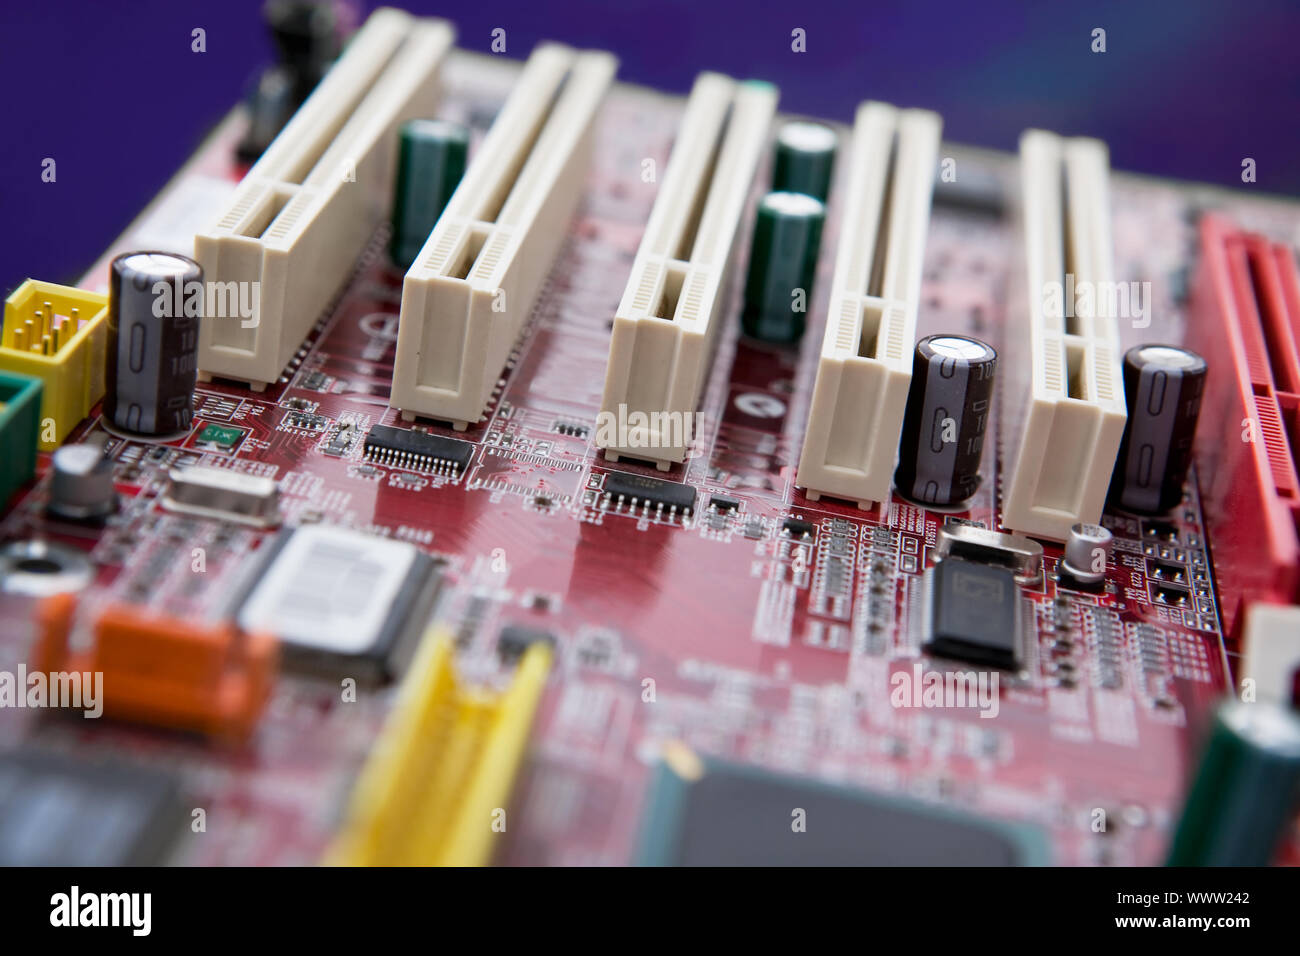 A detail image of a mother board with PCI slots. NOTE: Shallow depth of field is used to create an effective background image. Stock Photo